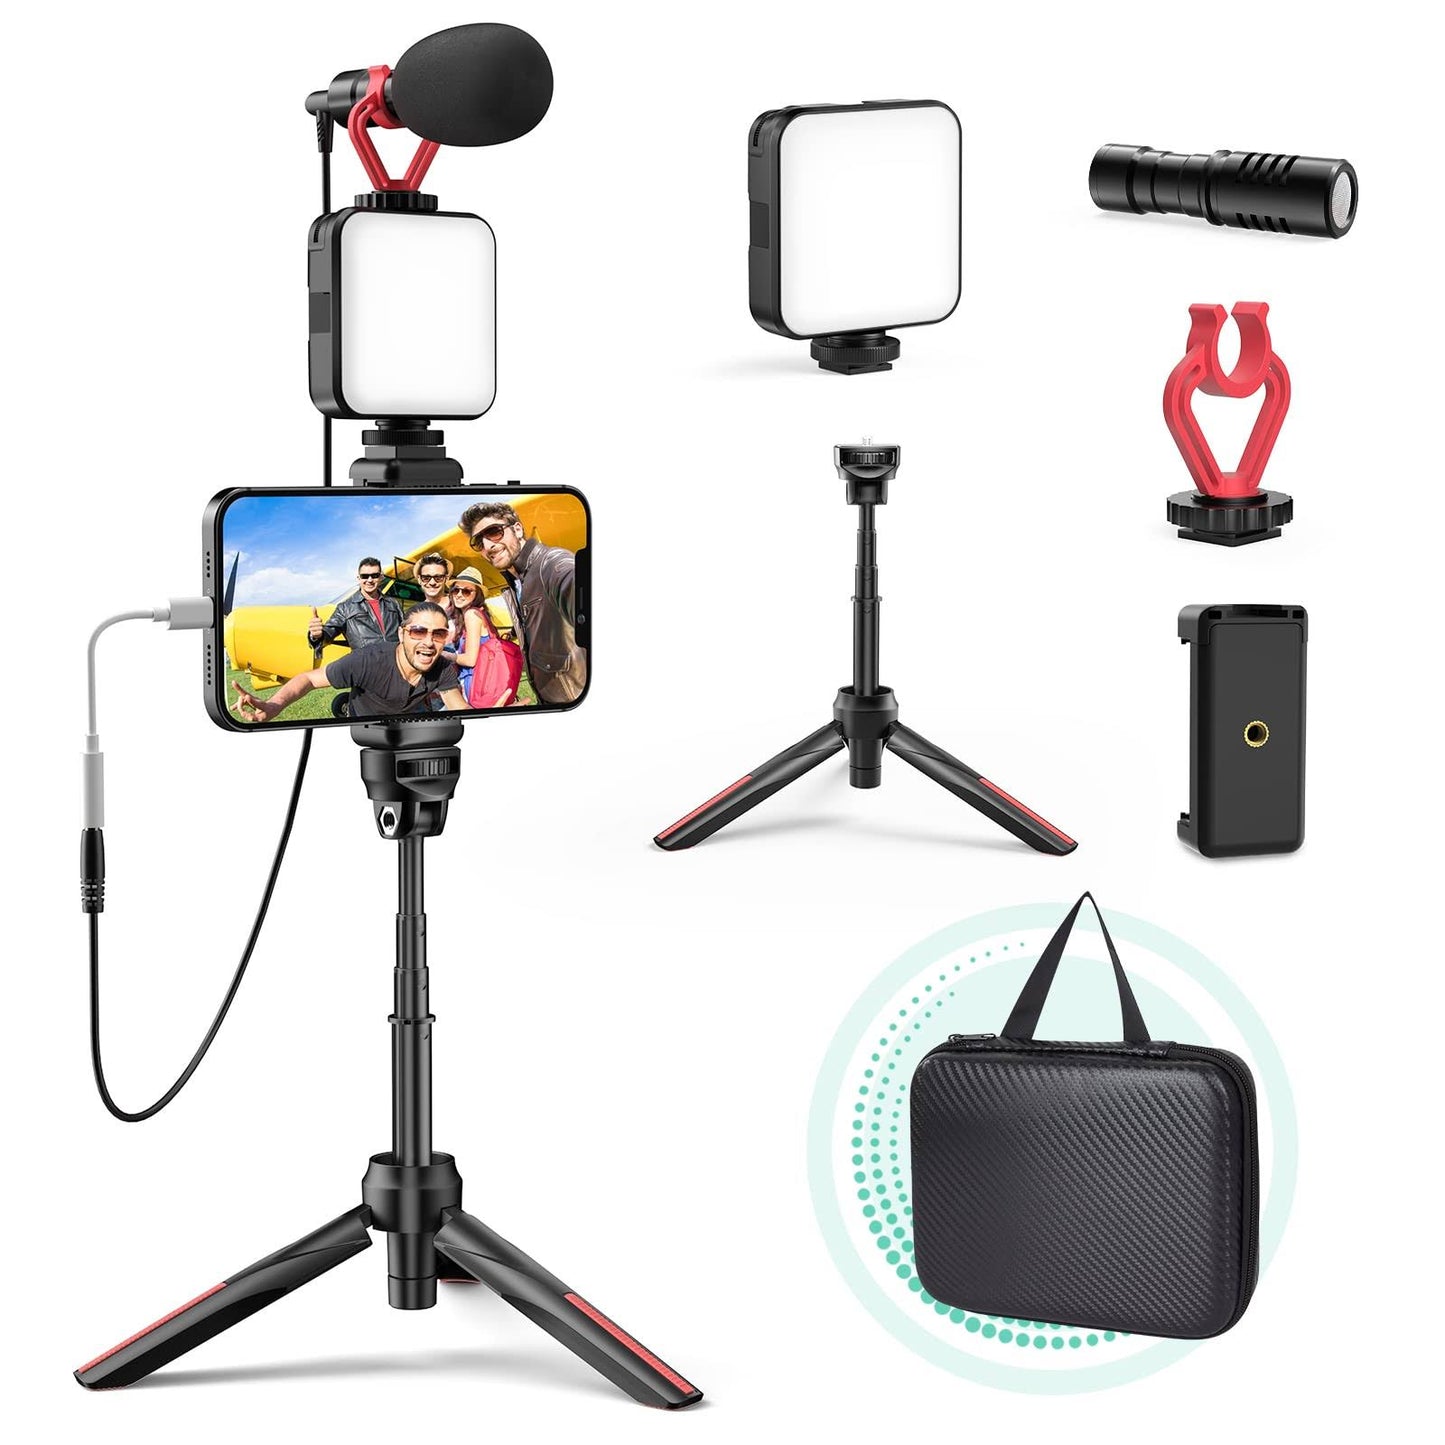 Video Vlogging Kit With Led Light, Phone Holder, Microphone, Tripod, Carry Bag, Tecelks Youtube Starter Kit For Iphone/Android, Content